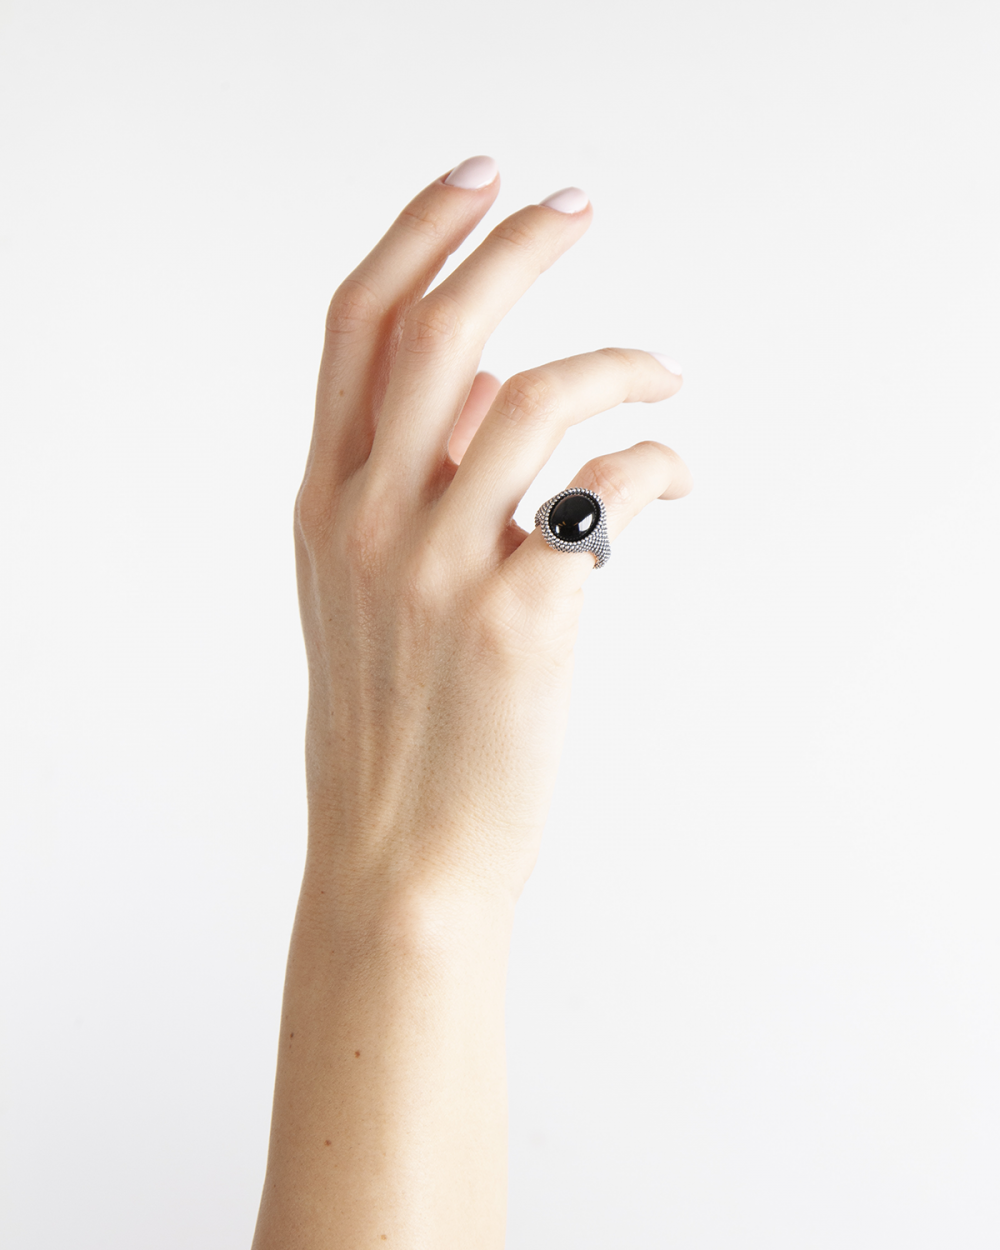 DOTTED OVAL ONYX SIGNET RING